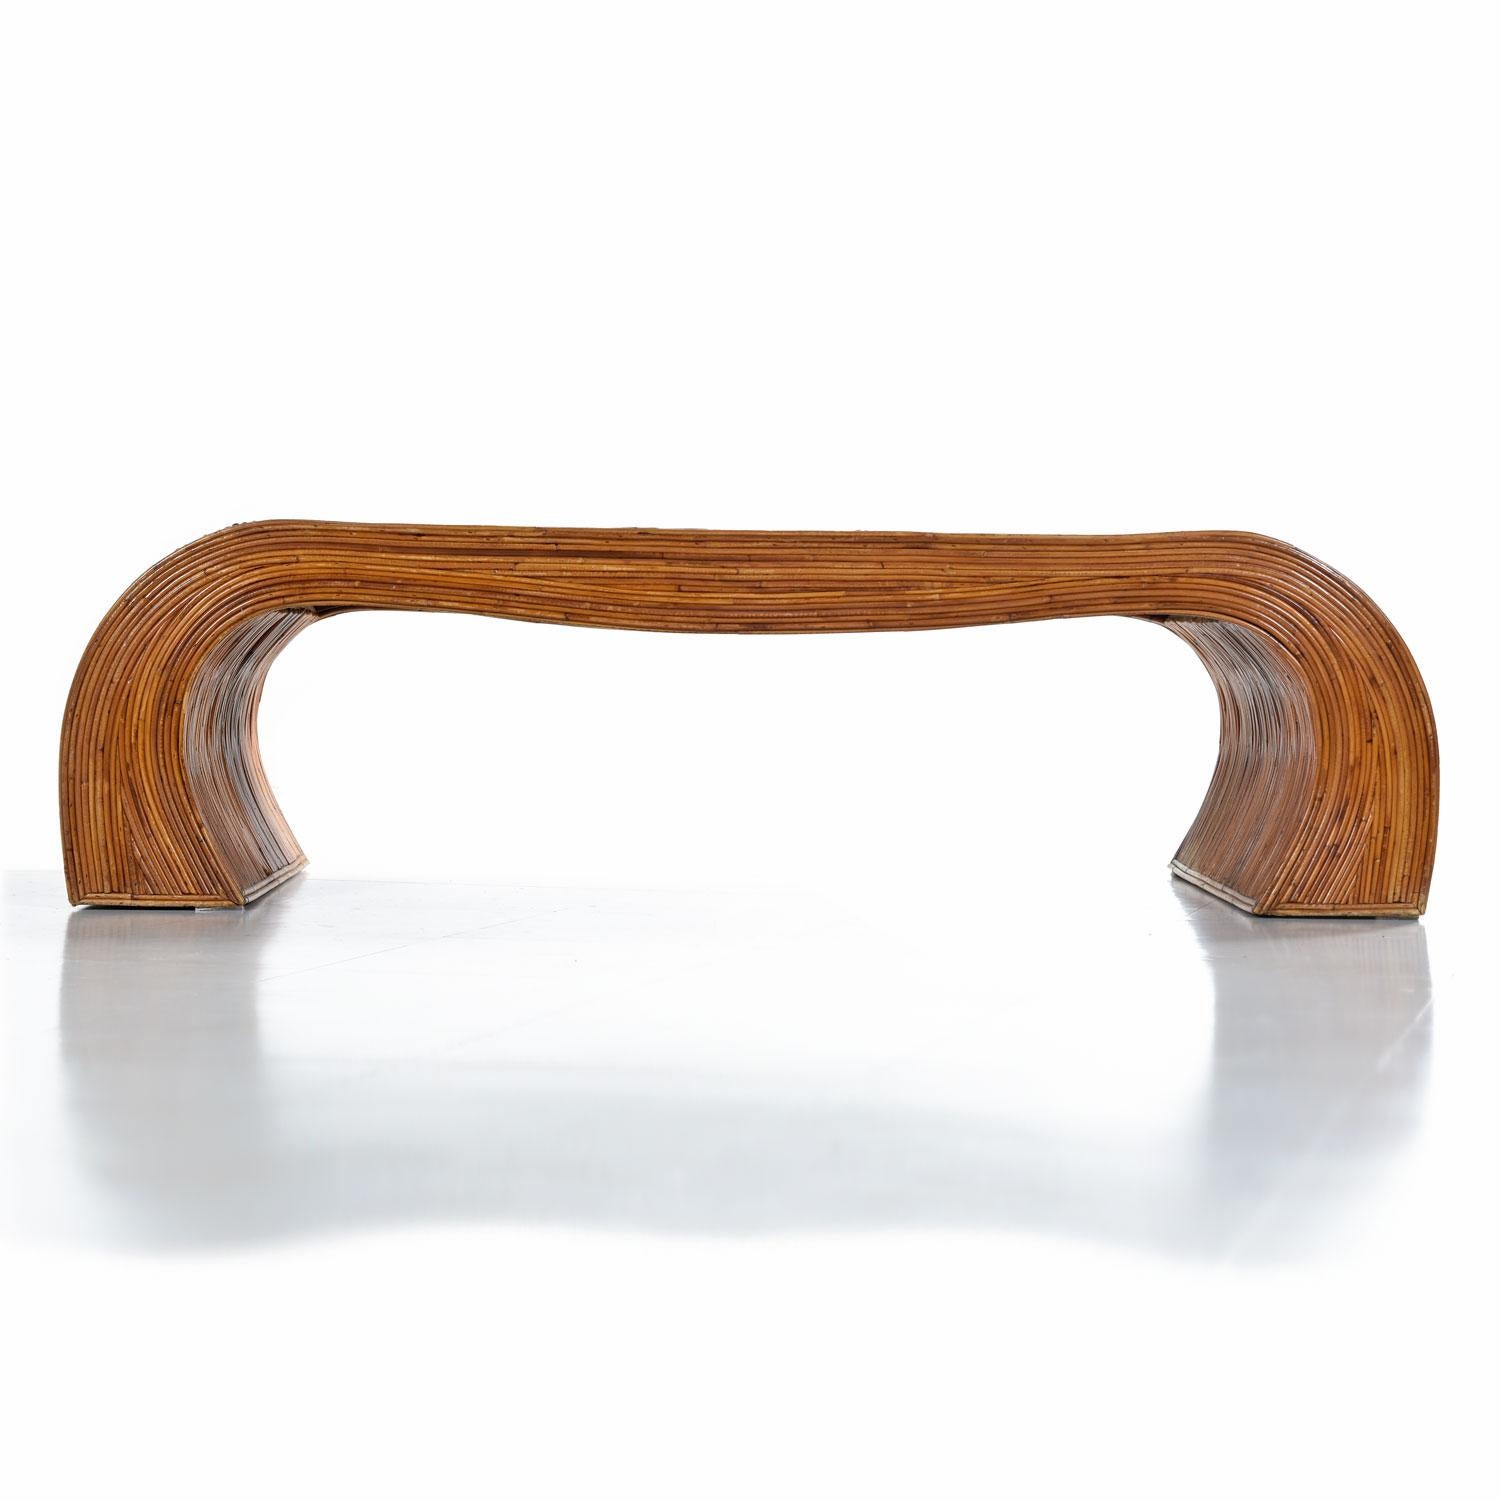 Monumental scale with the warmth of natural materials, this vintage Gabriella Crespi style pencil reed coffee table is the perfect focal point for your home. The earthy pencil reed motif is on trend, blending well with Bohemian, contemporary and